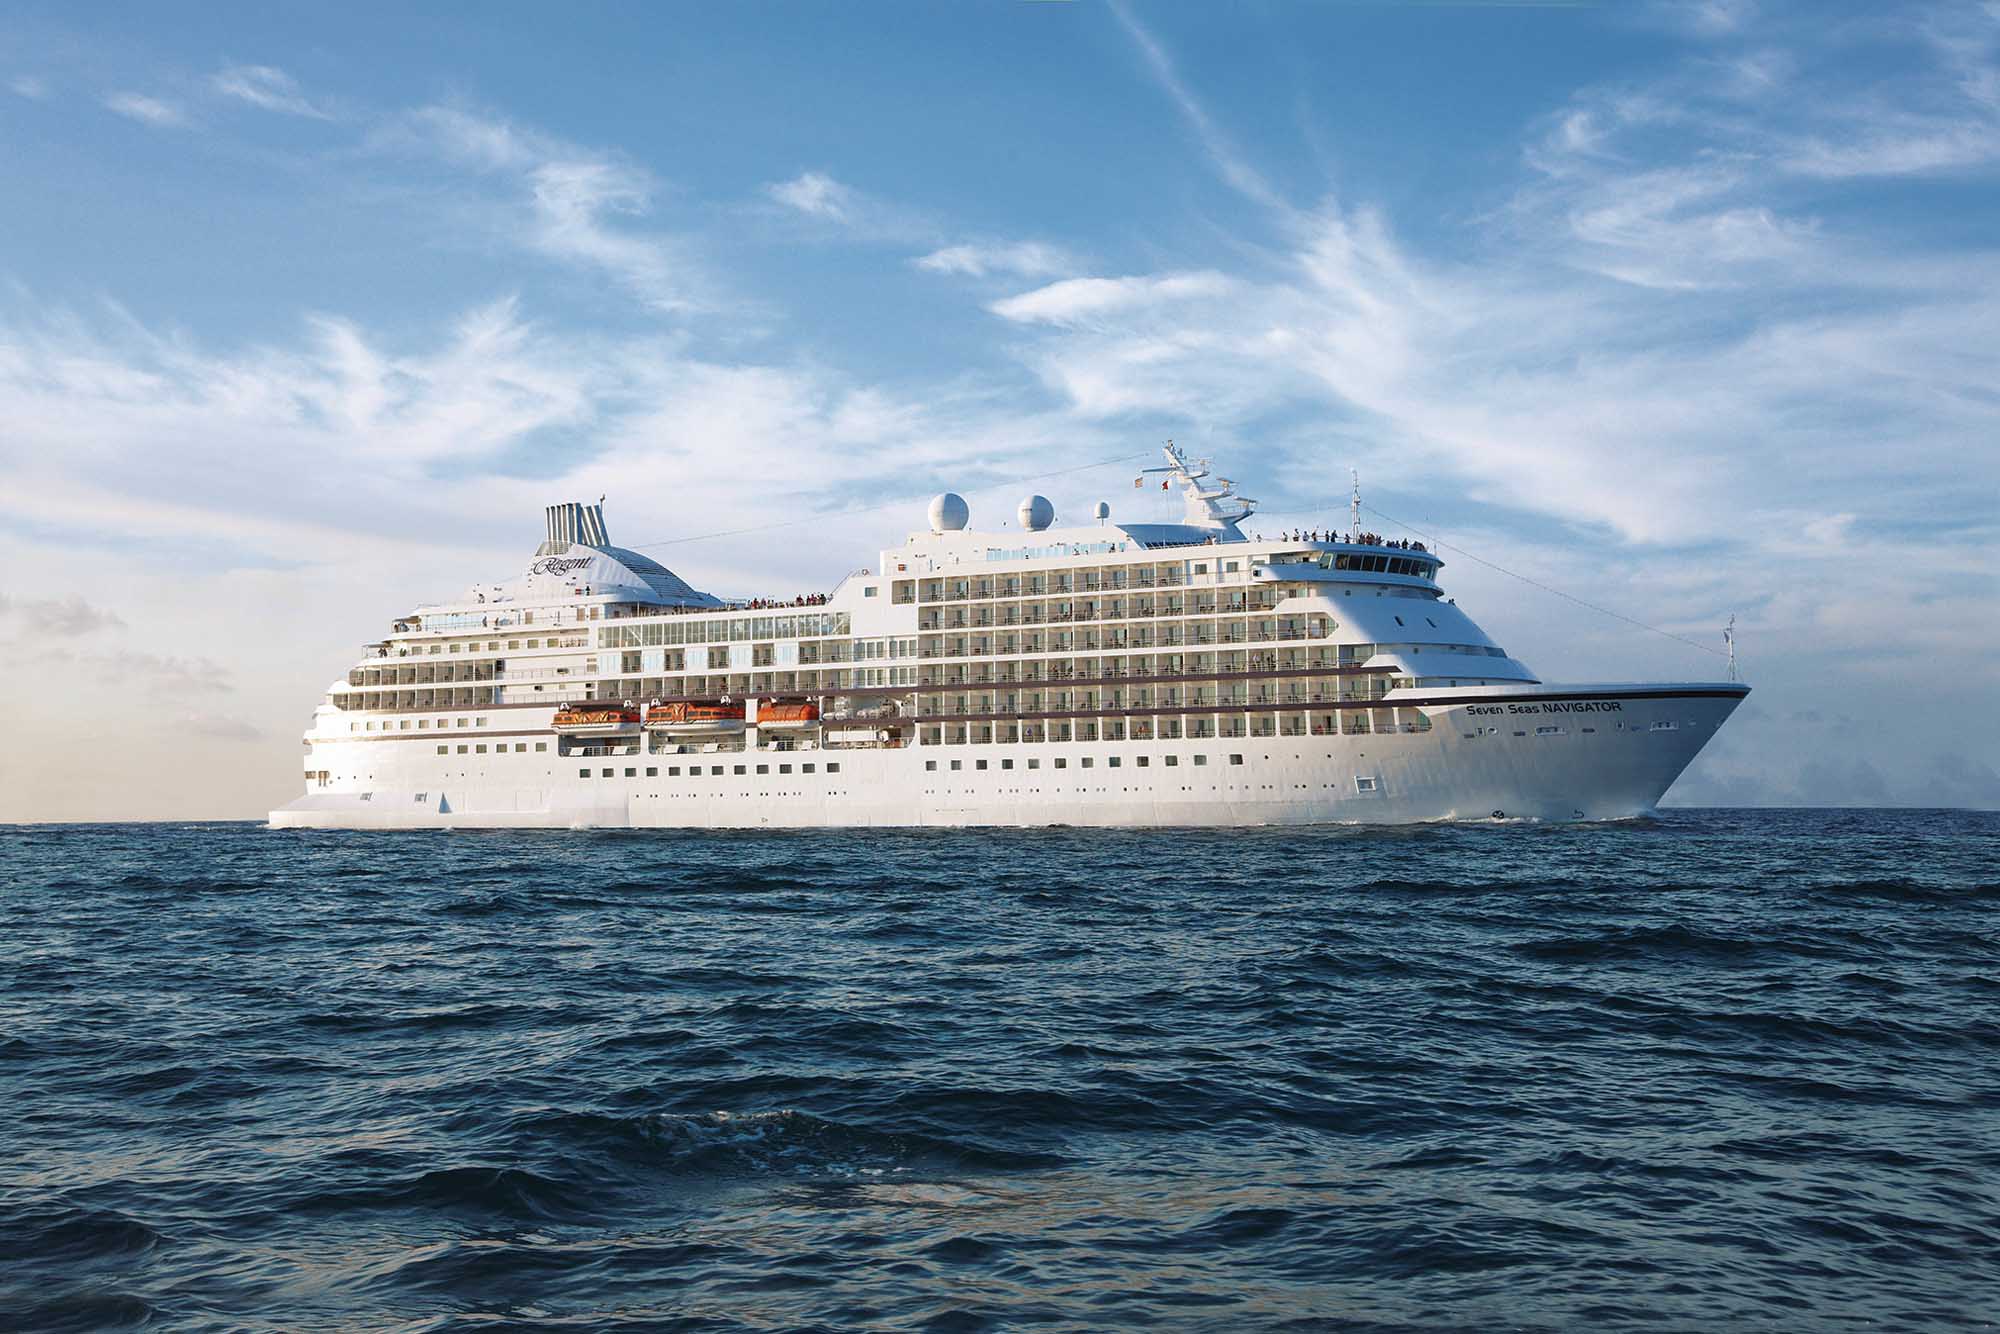 Explore the world in luxurious style aboard Seven Seas Navigator.